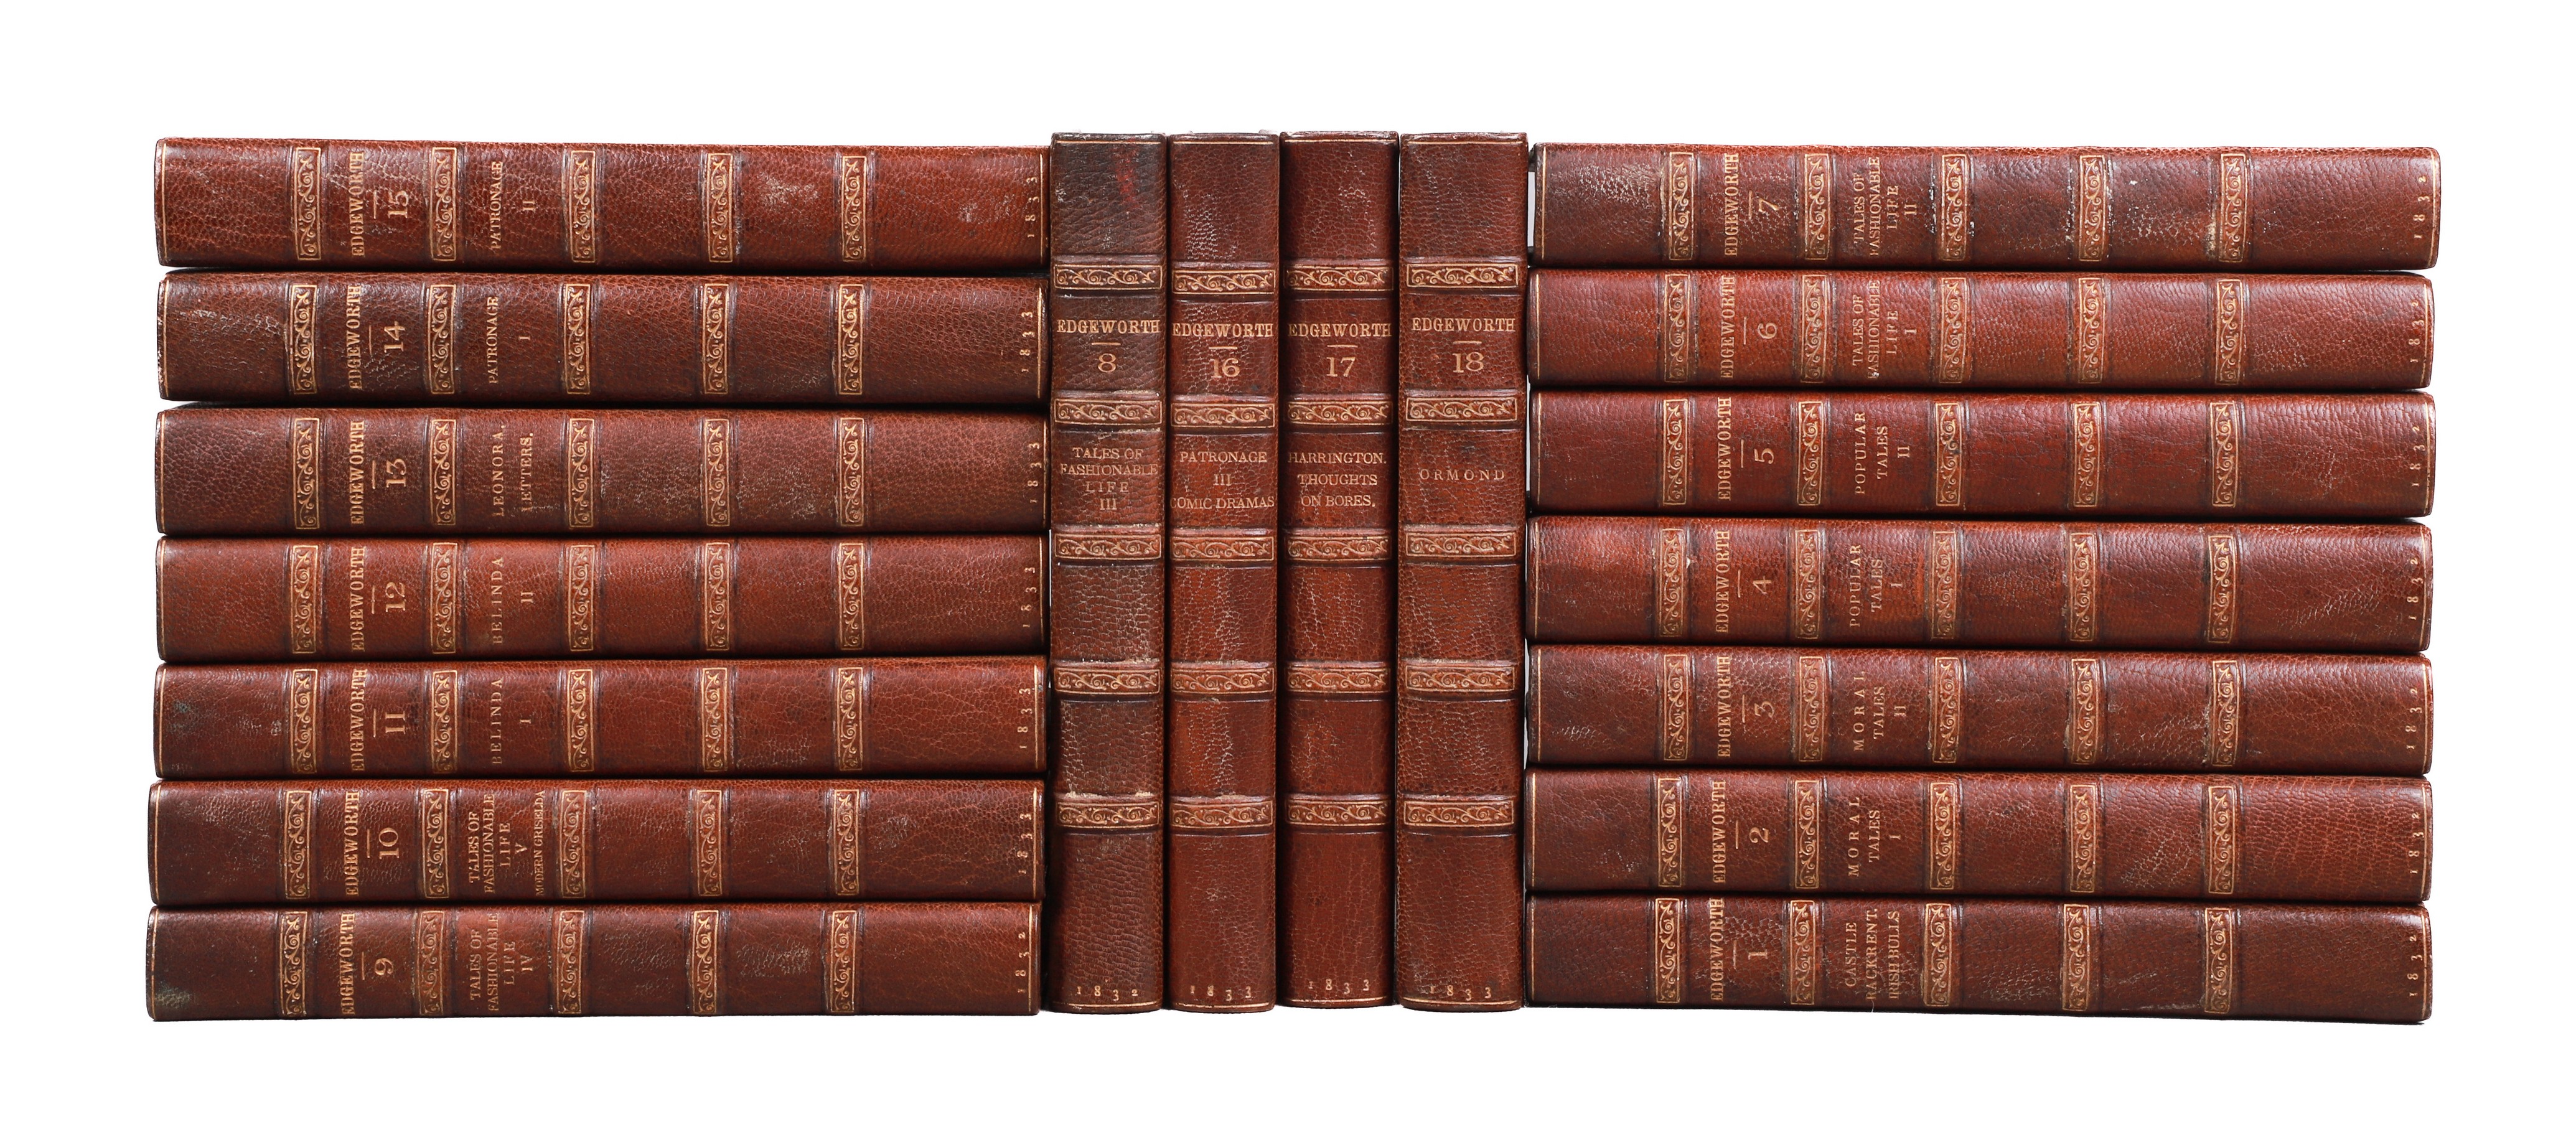 An 18-volume set in half leather